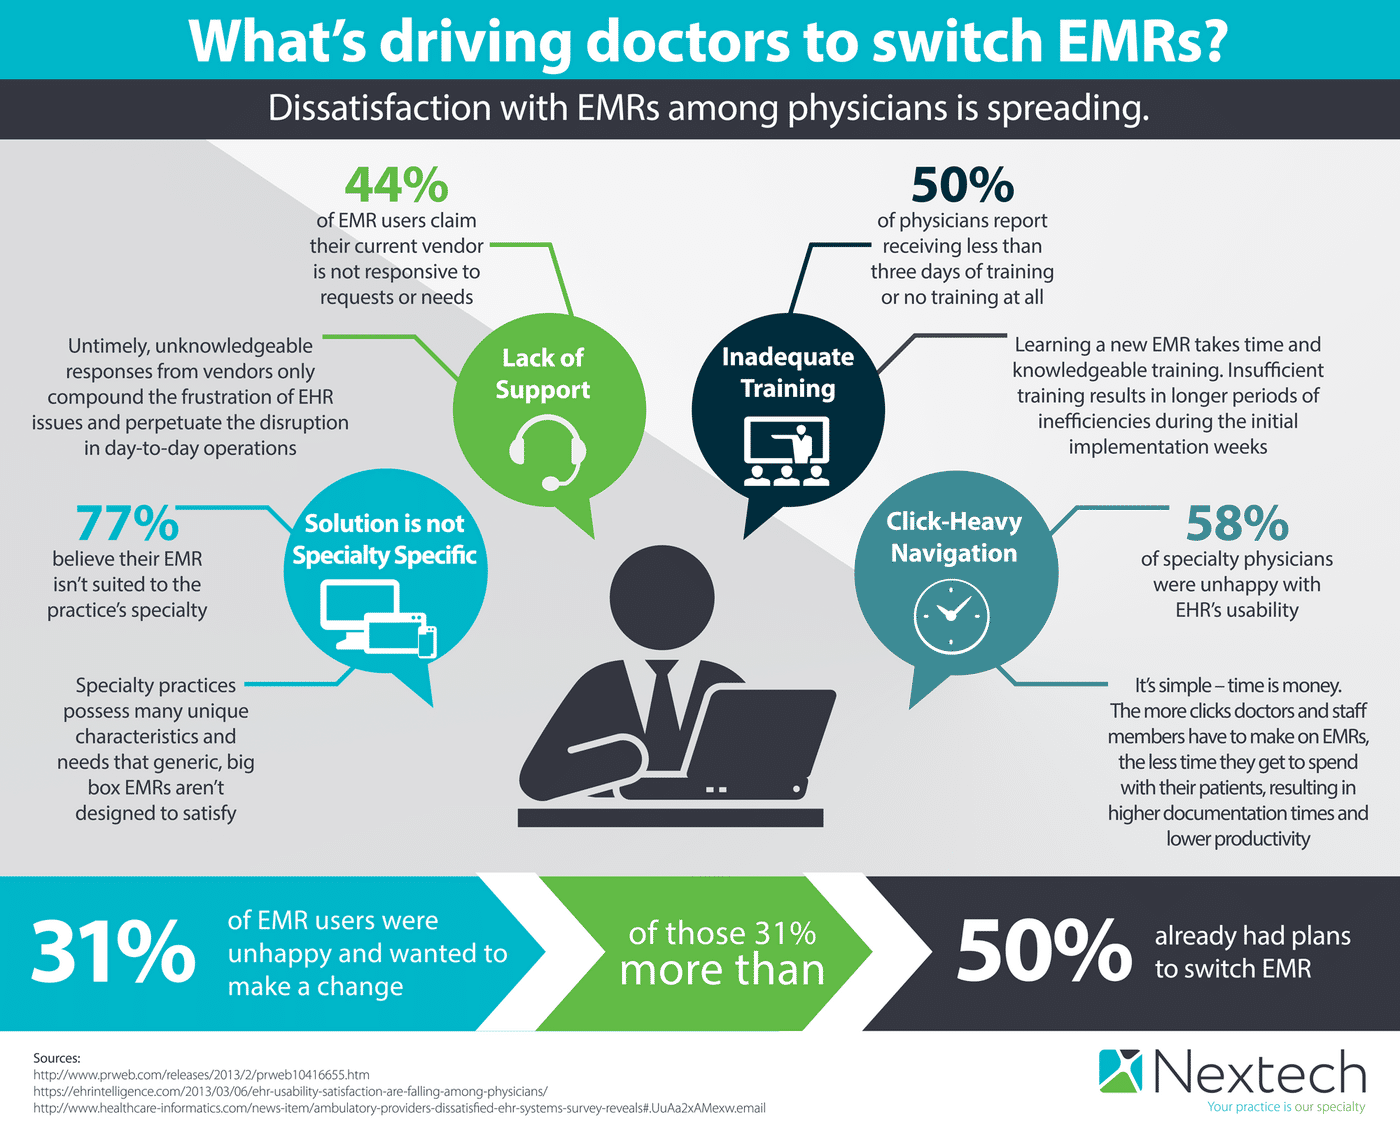 What is driving doctors to switch EMR vendors?